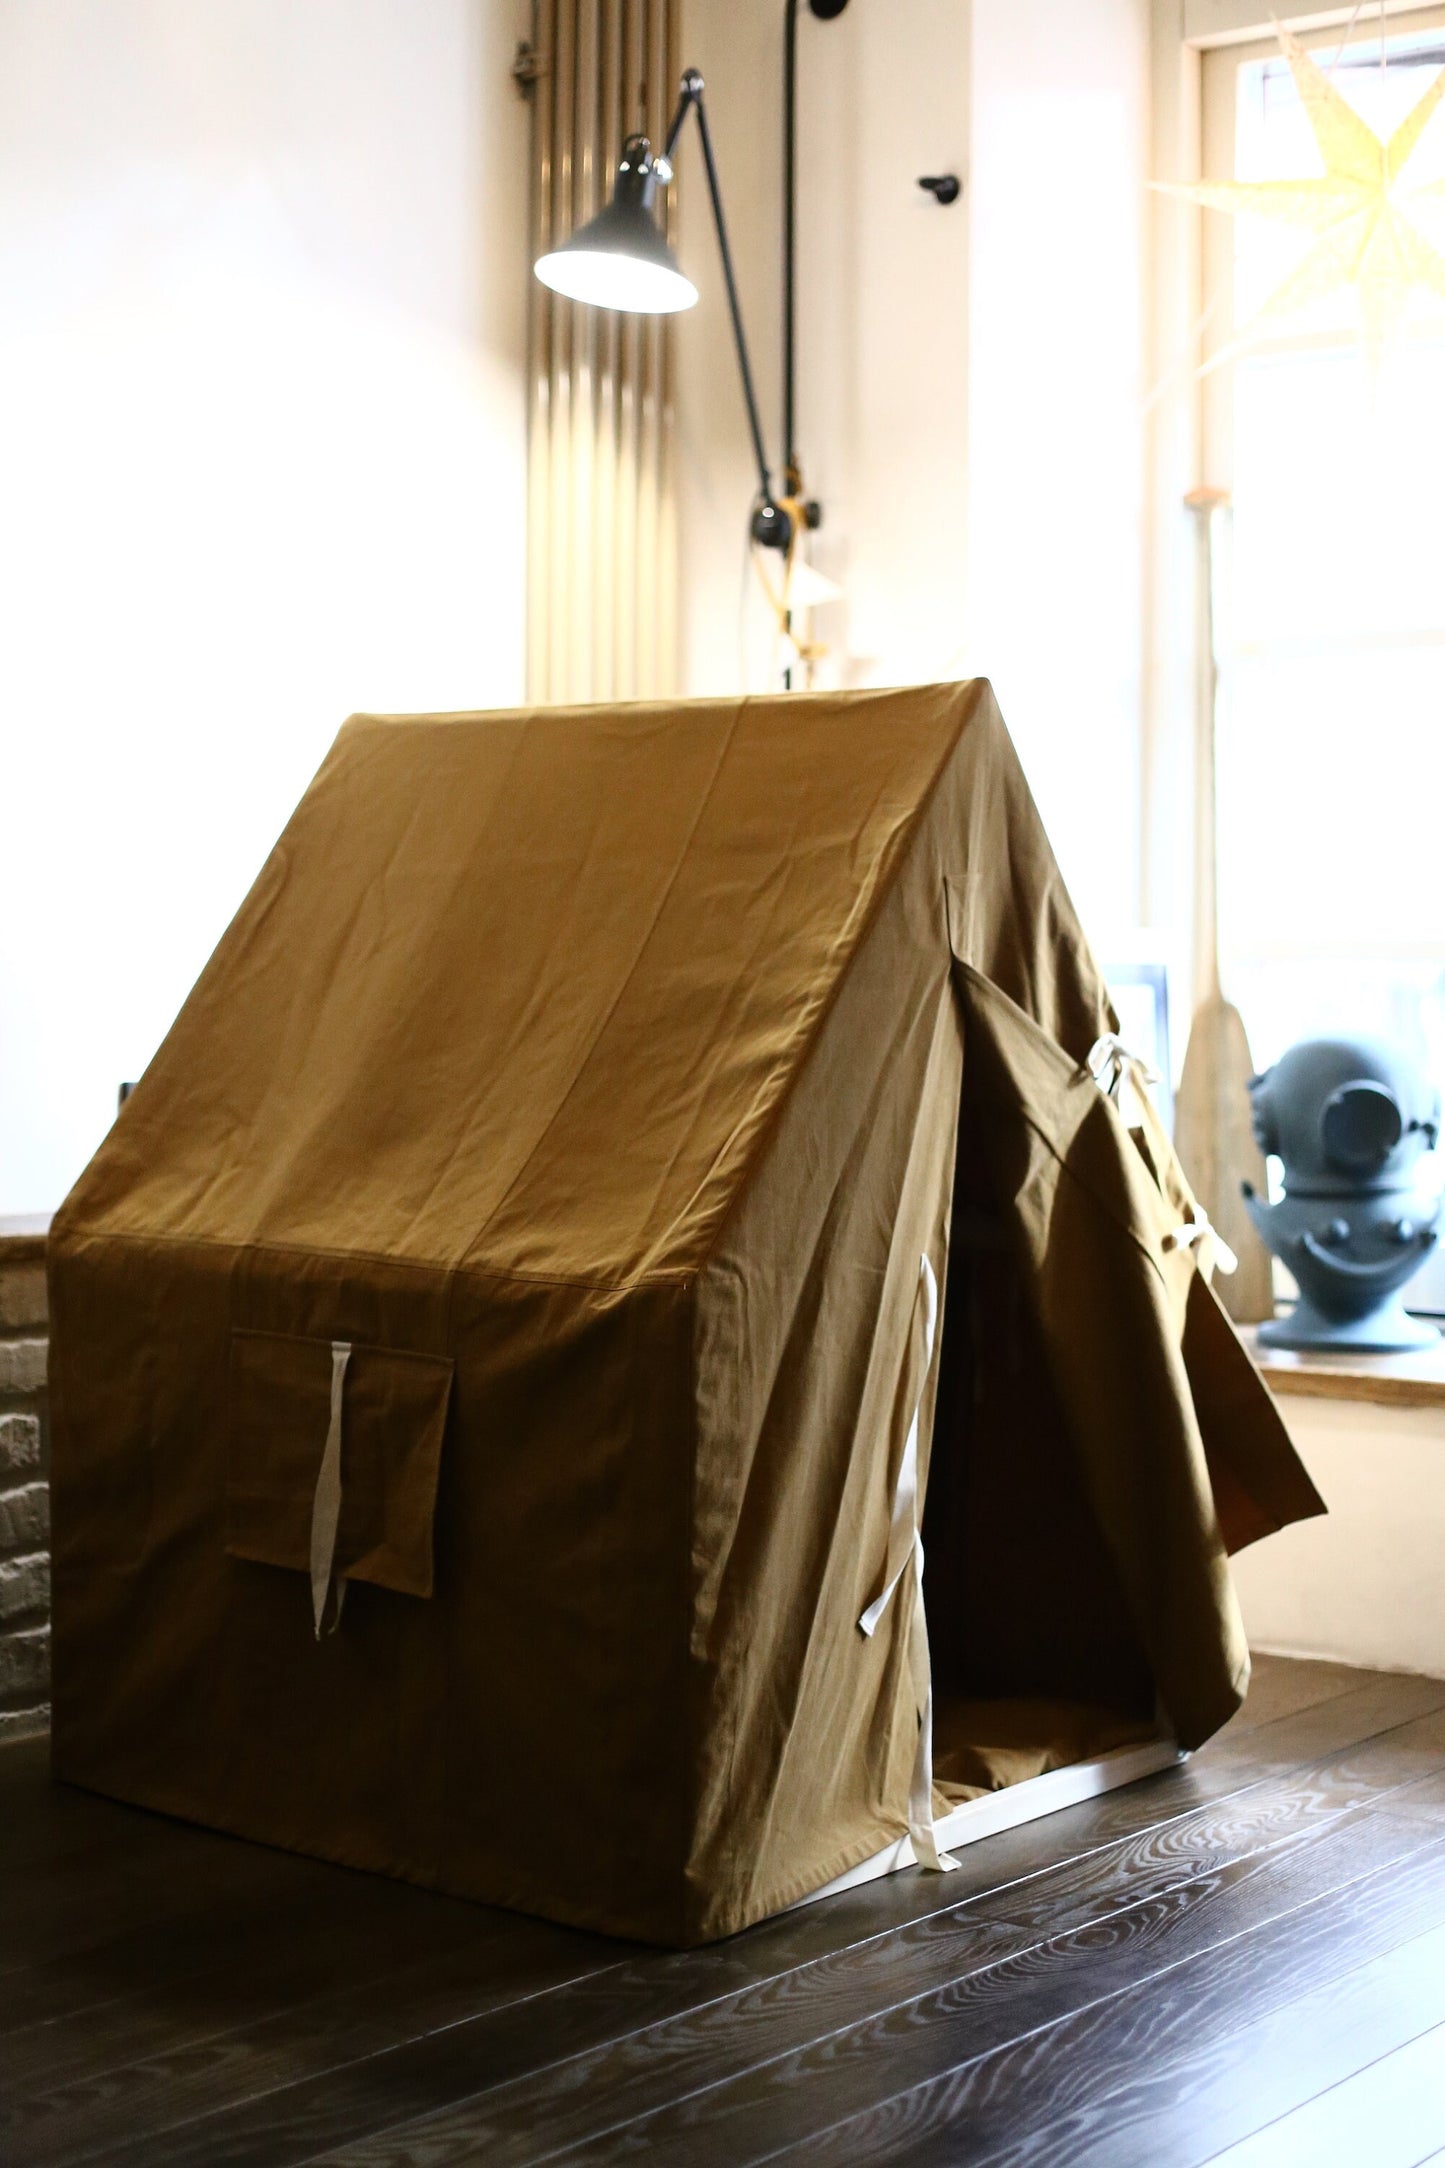 Military Tent / Home Tent For Kids / Canvas Camping / Boys Tent House / Tiny Playhouse / Custom Tents - 1st birthday